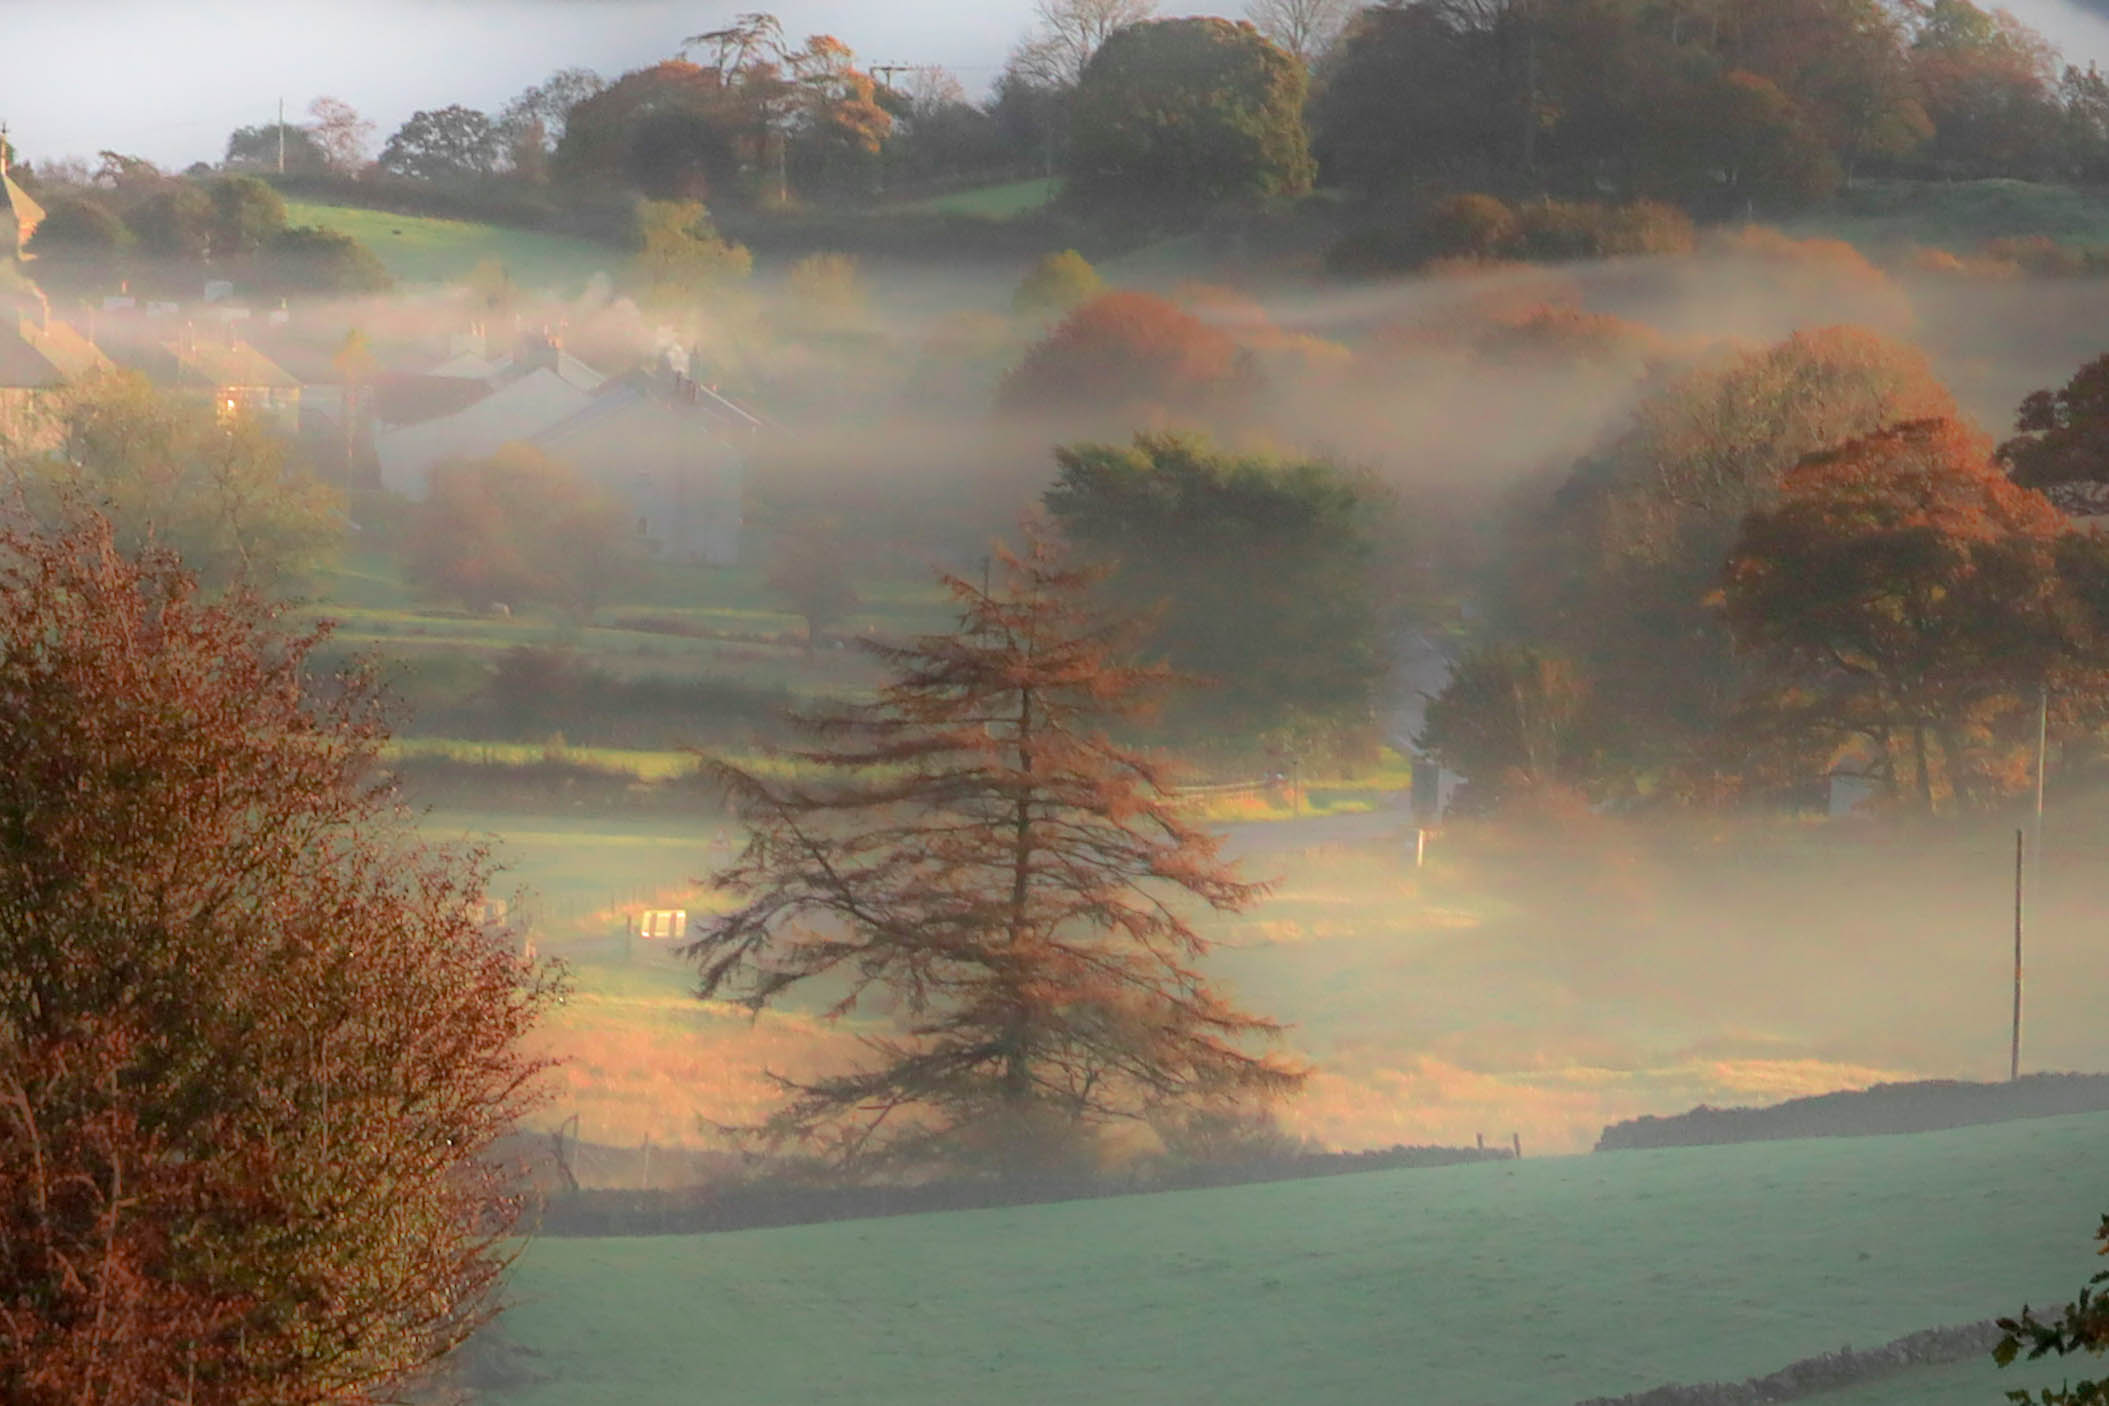 1st Place September the season of mists and mellow fruitfulness by Jude@green @JUDITHM58257161